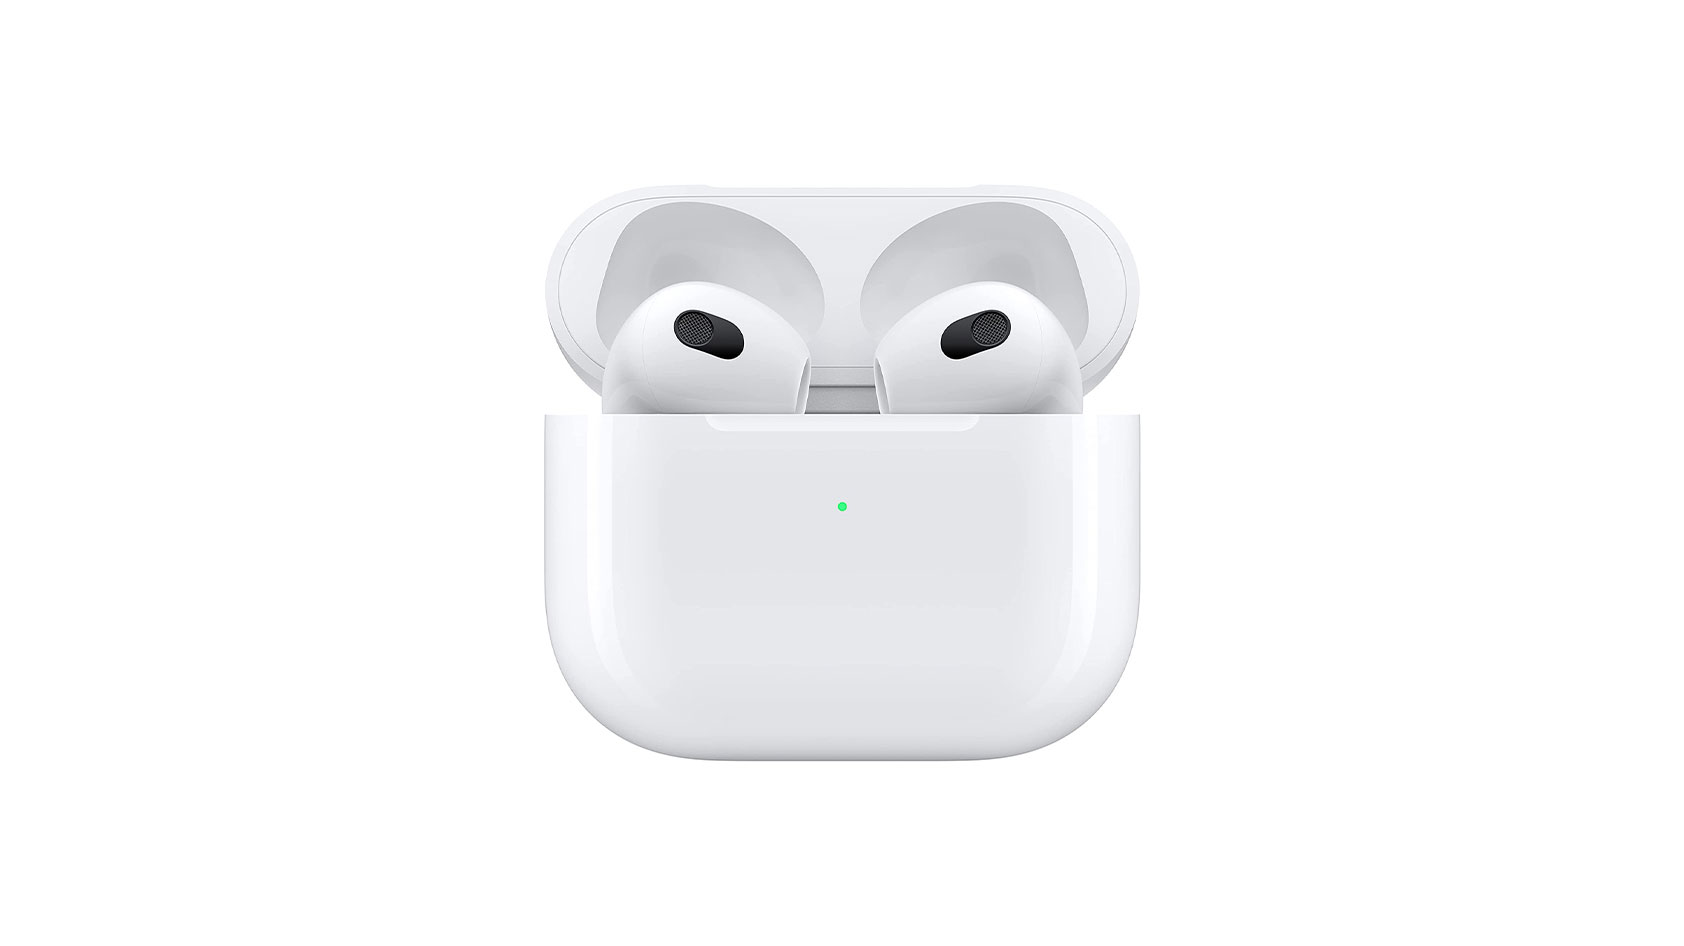 The Apple AirPods (3rd generation) true wireless earbuds in the open charging case against a white background.